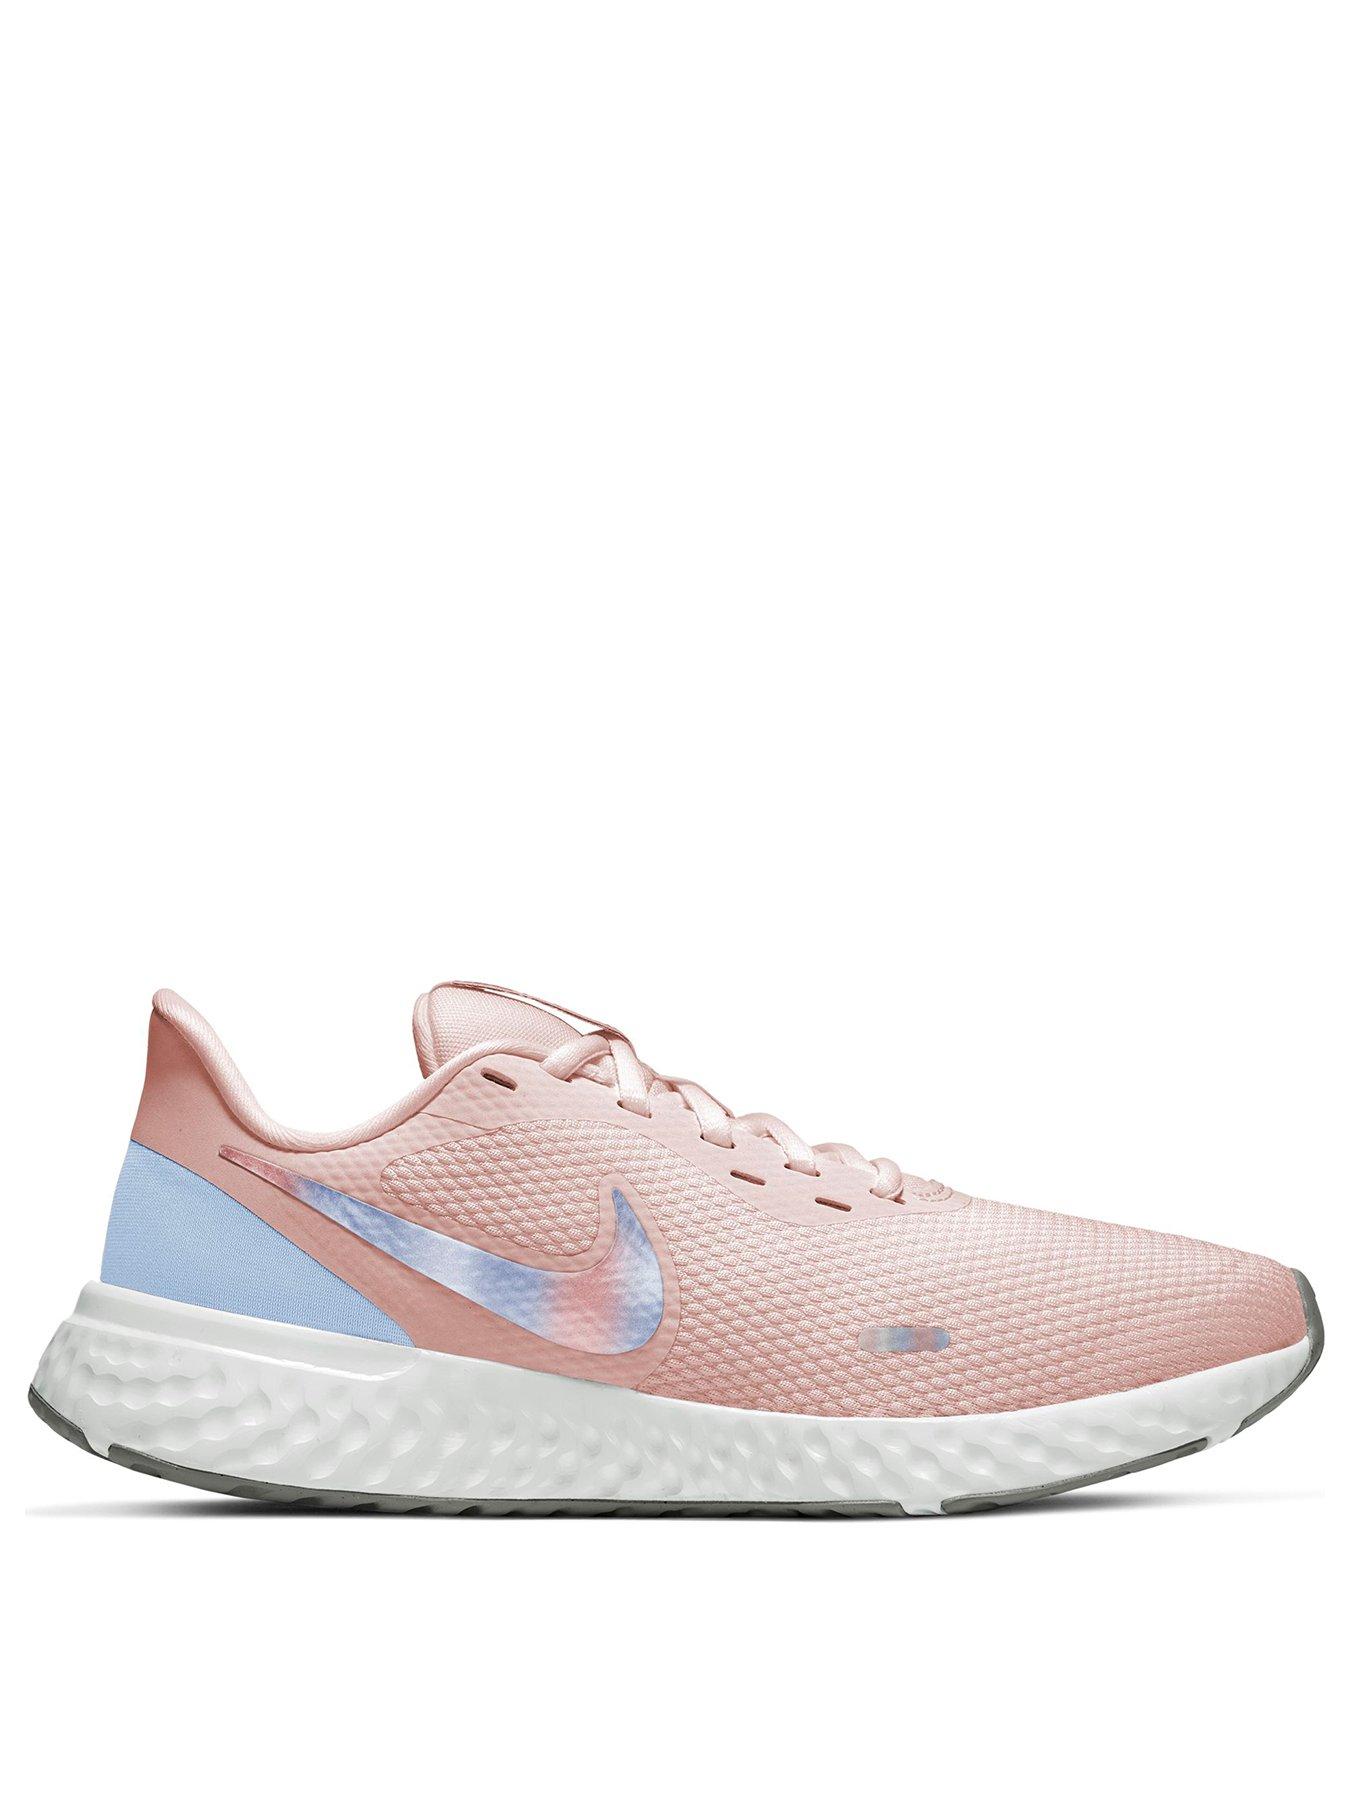 All Black Friday Deals | Nike Revolution | Pink | Nike | Trainers ...